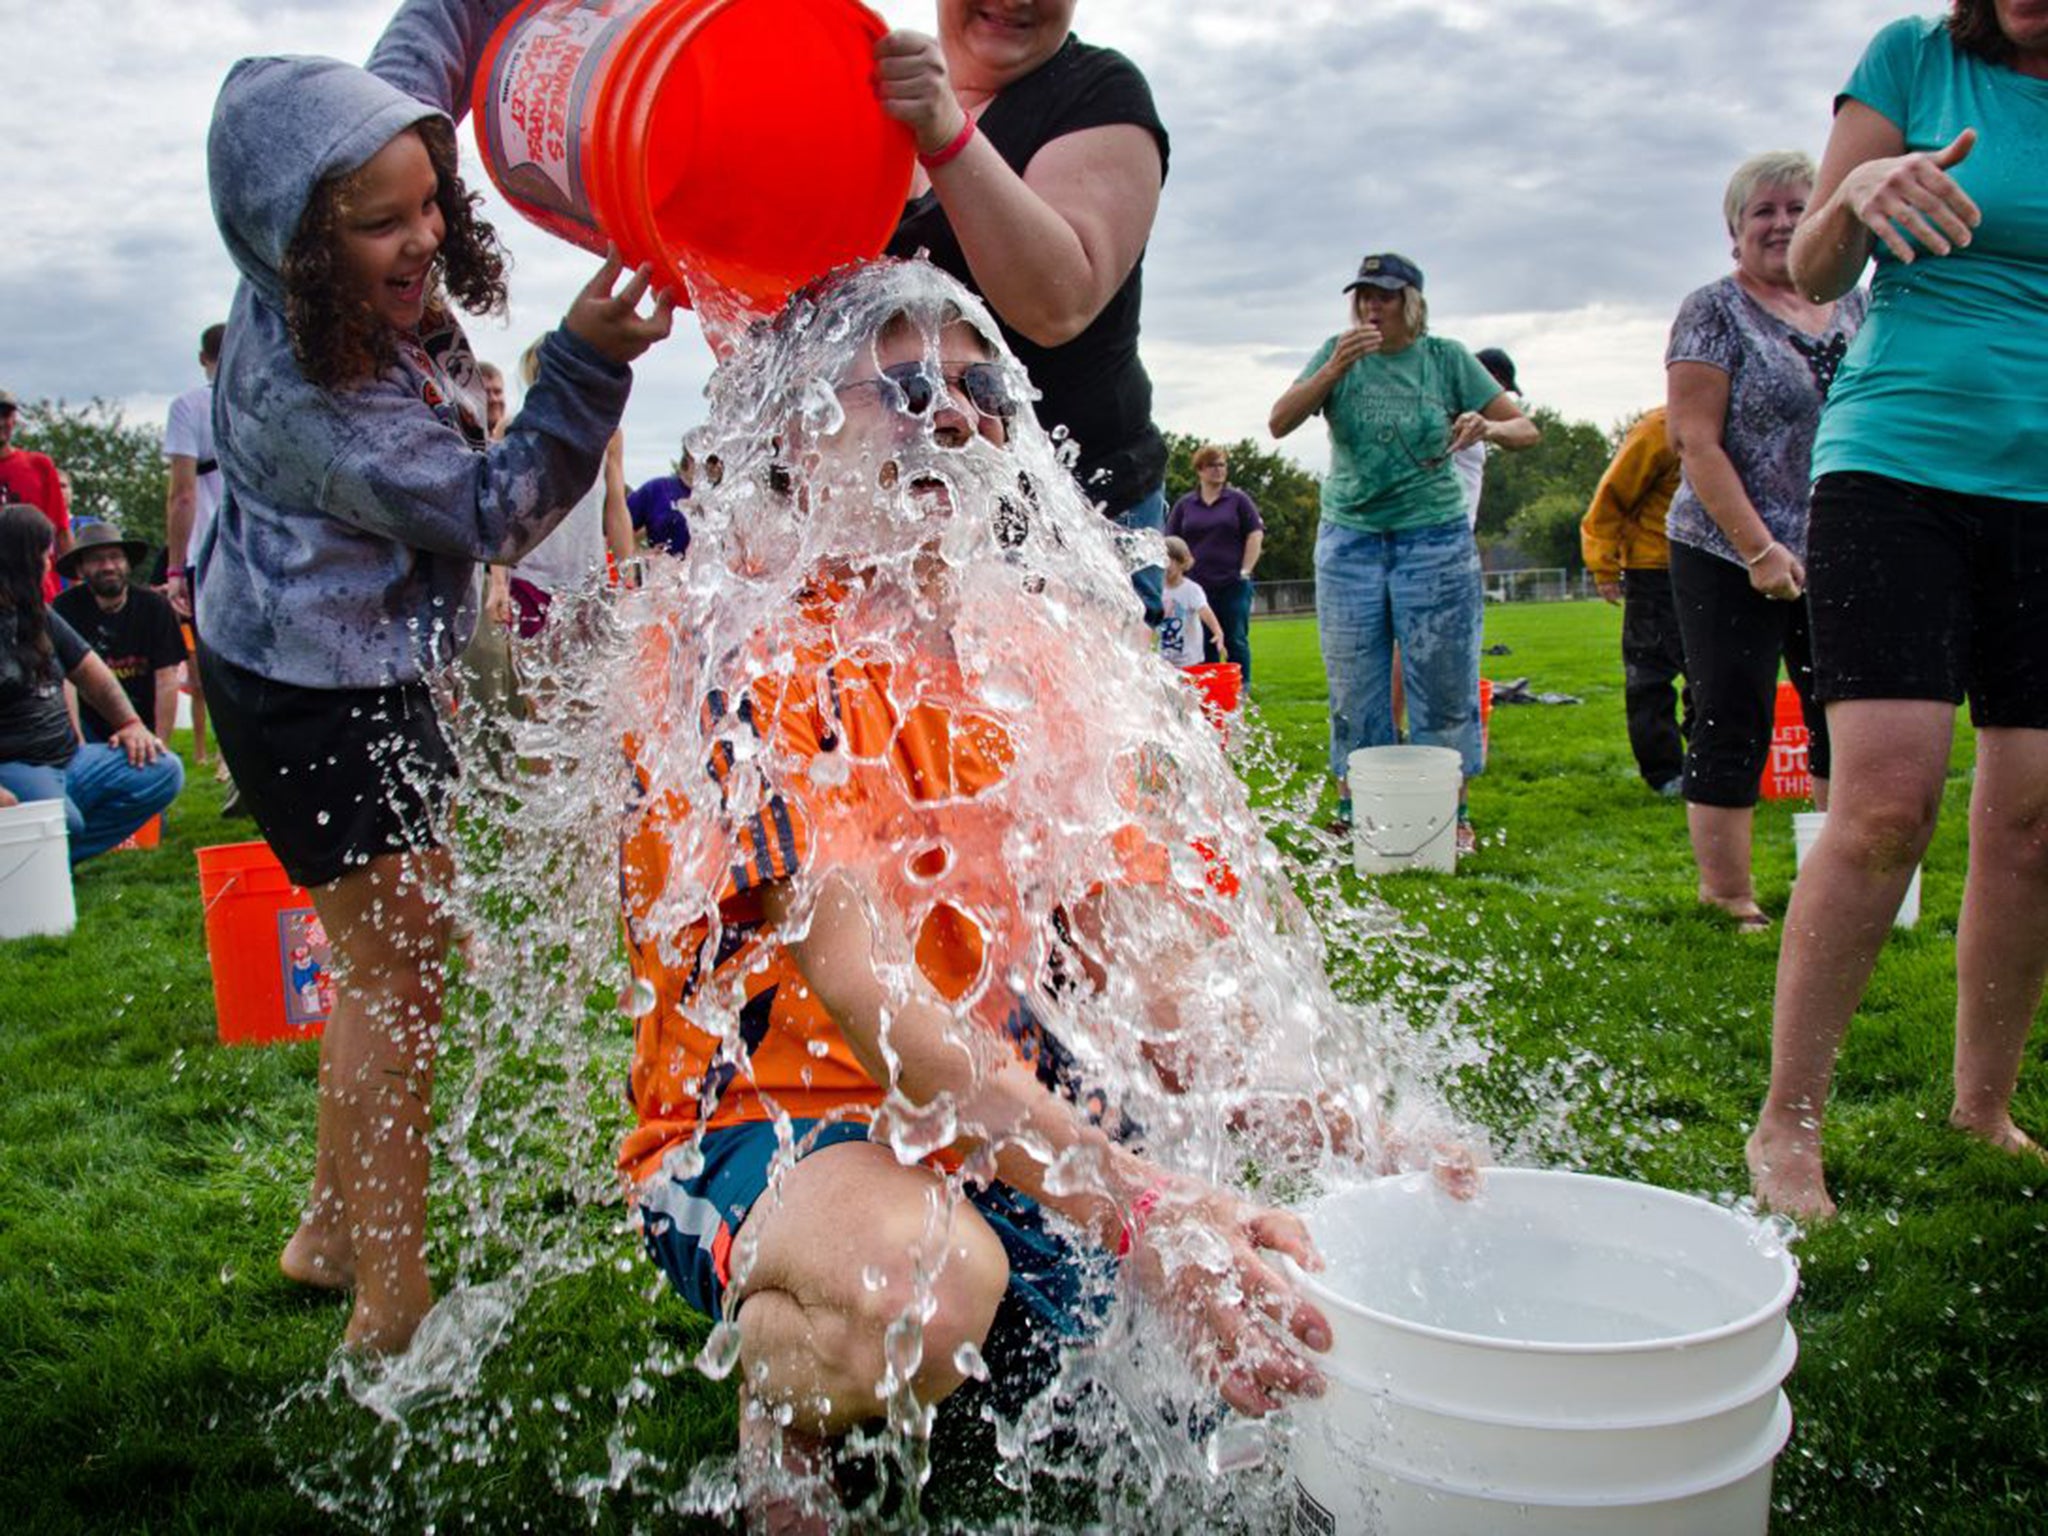 The ice bucket challenge raised money for ALS and its charity, setting off a rash of Google searches